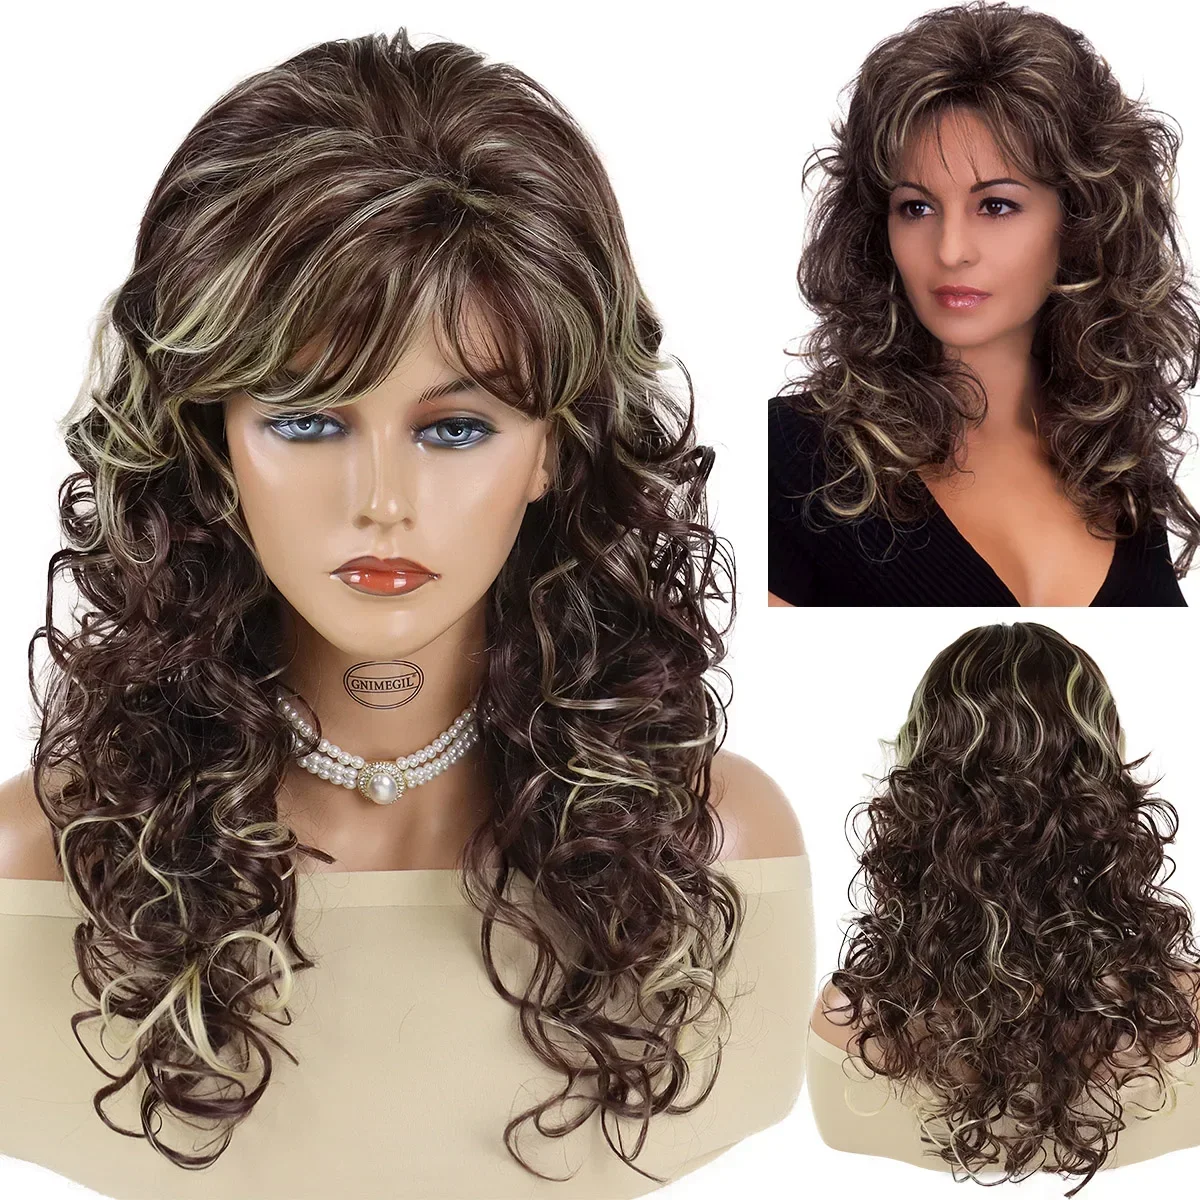 

GNIMEGIL Synthetic Brown Blonde Highlight Wigs for Women Long Curly Wig with Bangs Natural Elegant Mommy Daily Ladies Wig Party